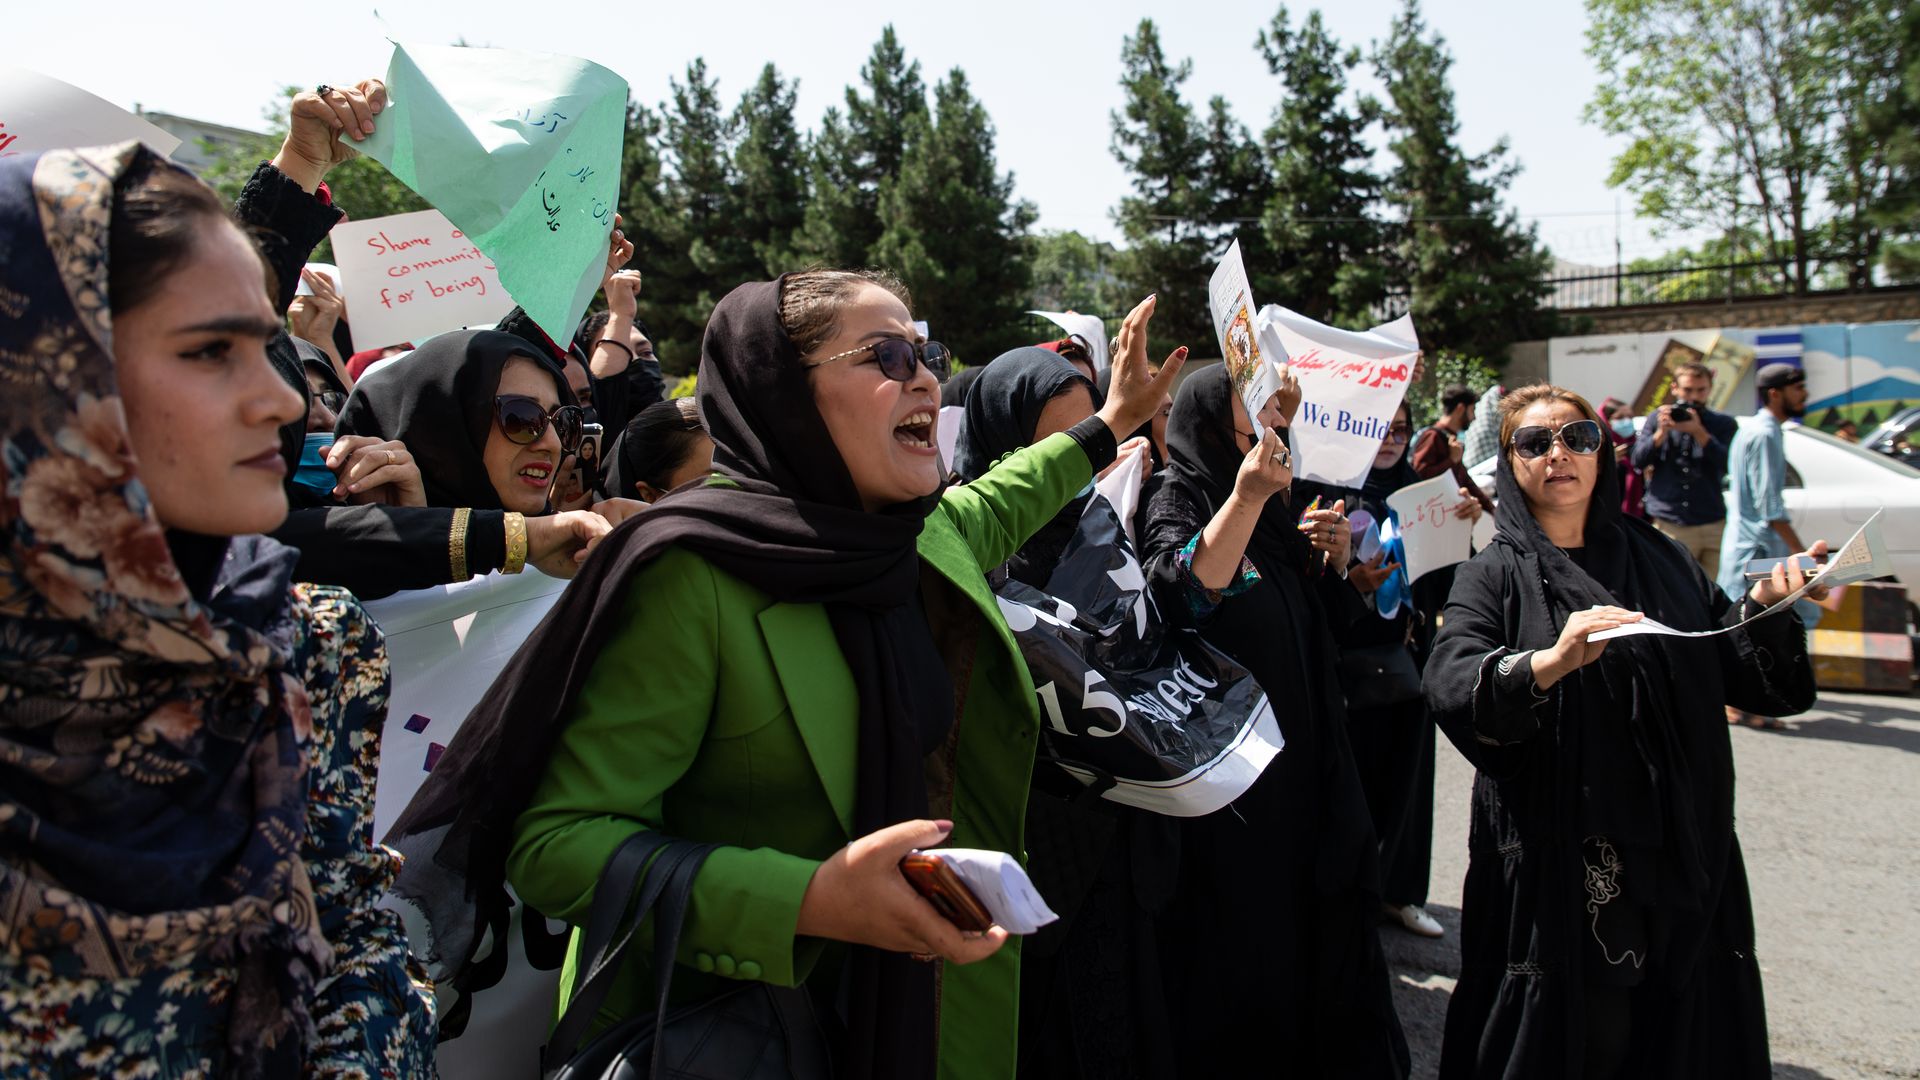 Women protesting in Afghanistan were beaten by Taliban fighters Saturday